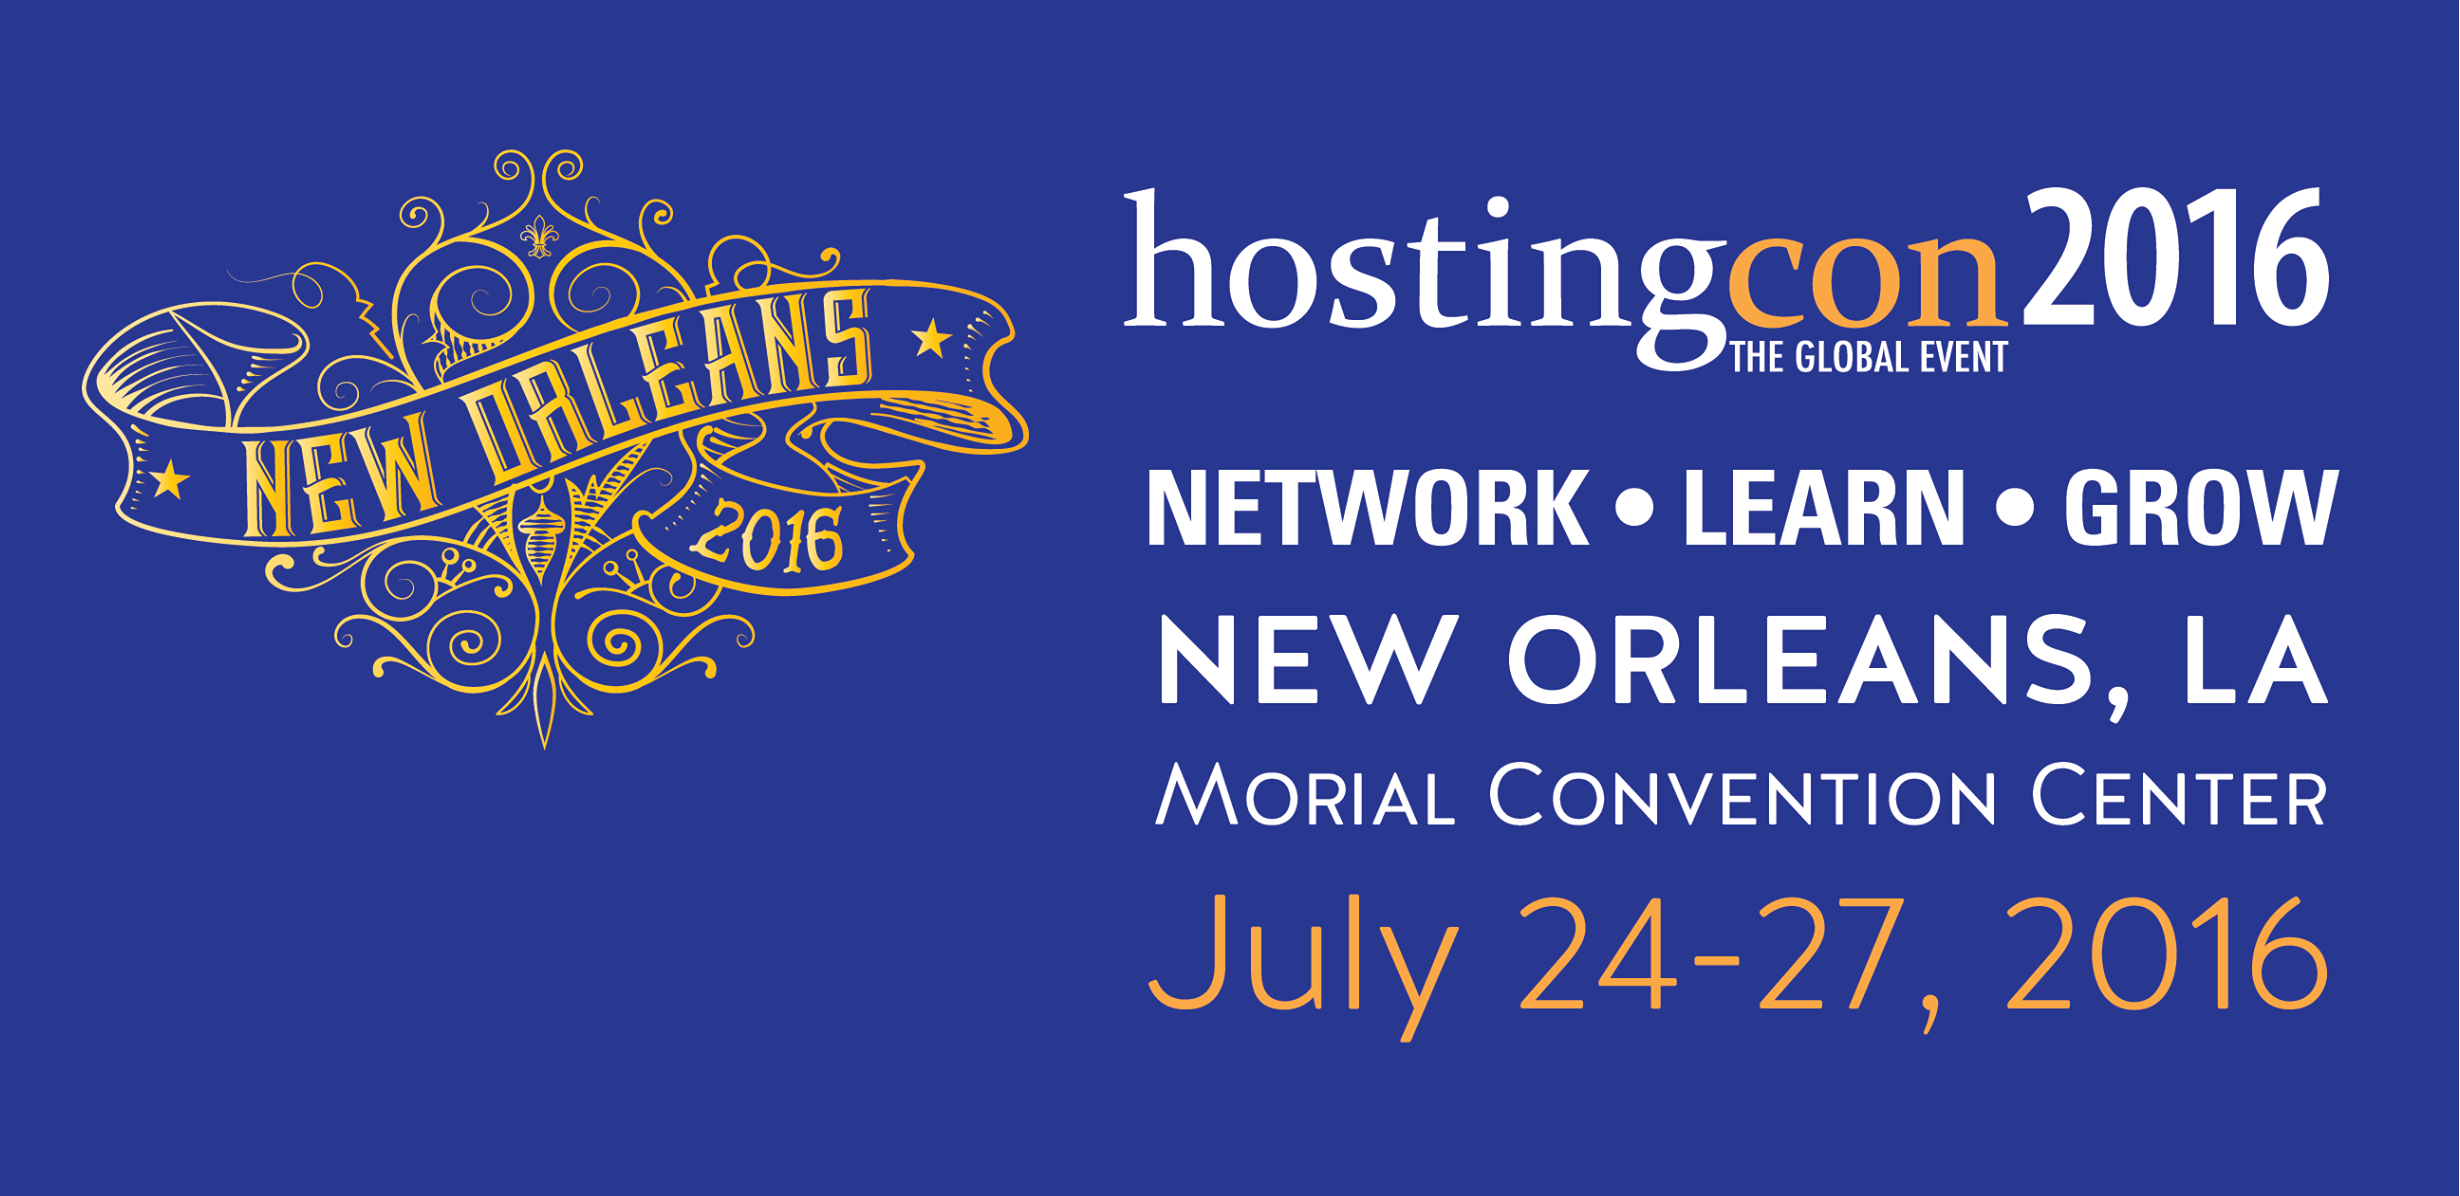 New Orleans and HostingCon 2016 text in orange, white, and blue